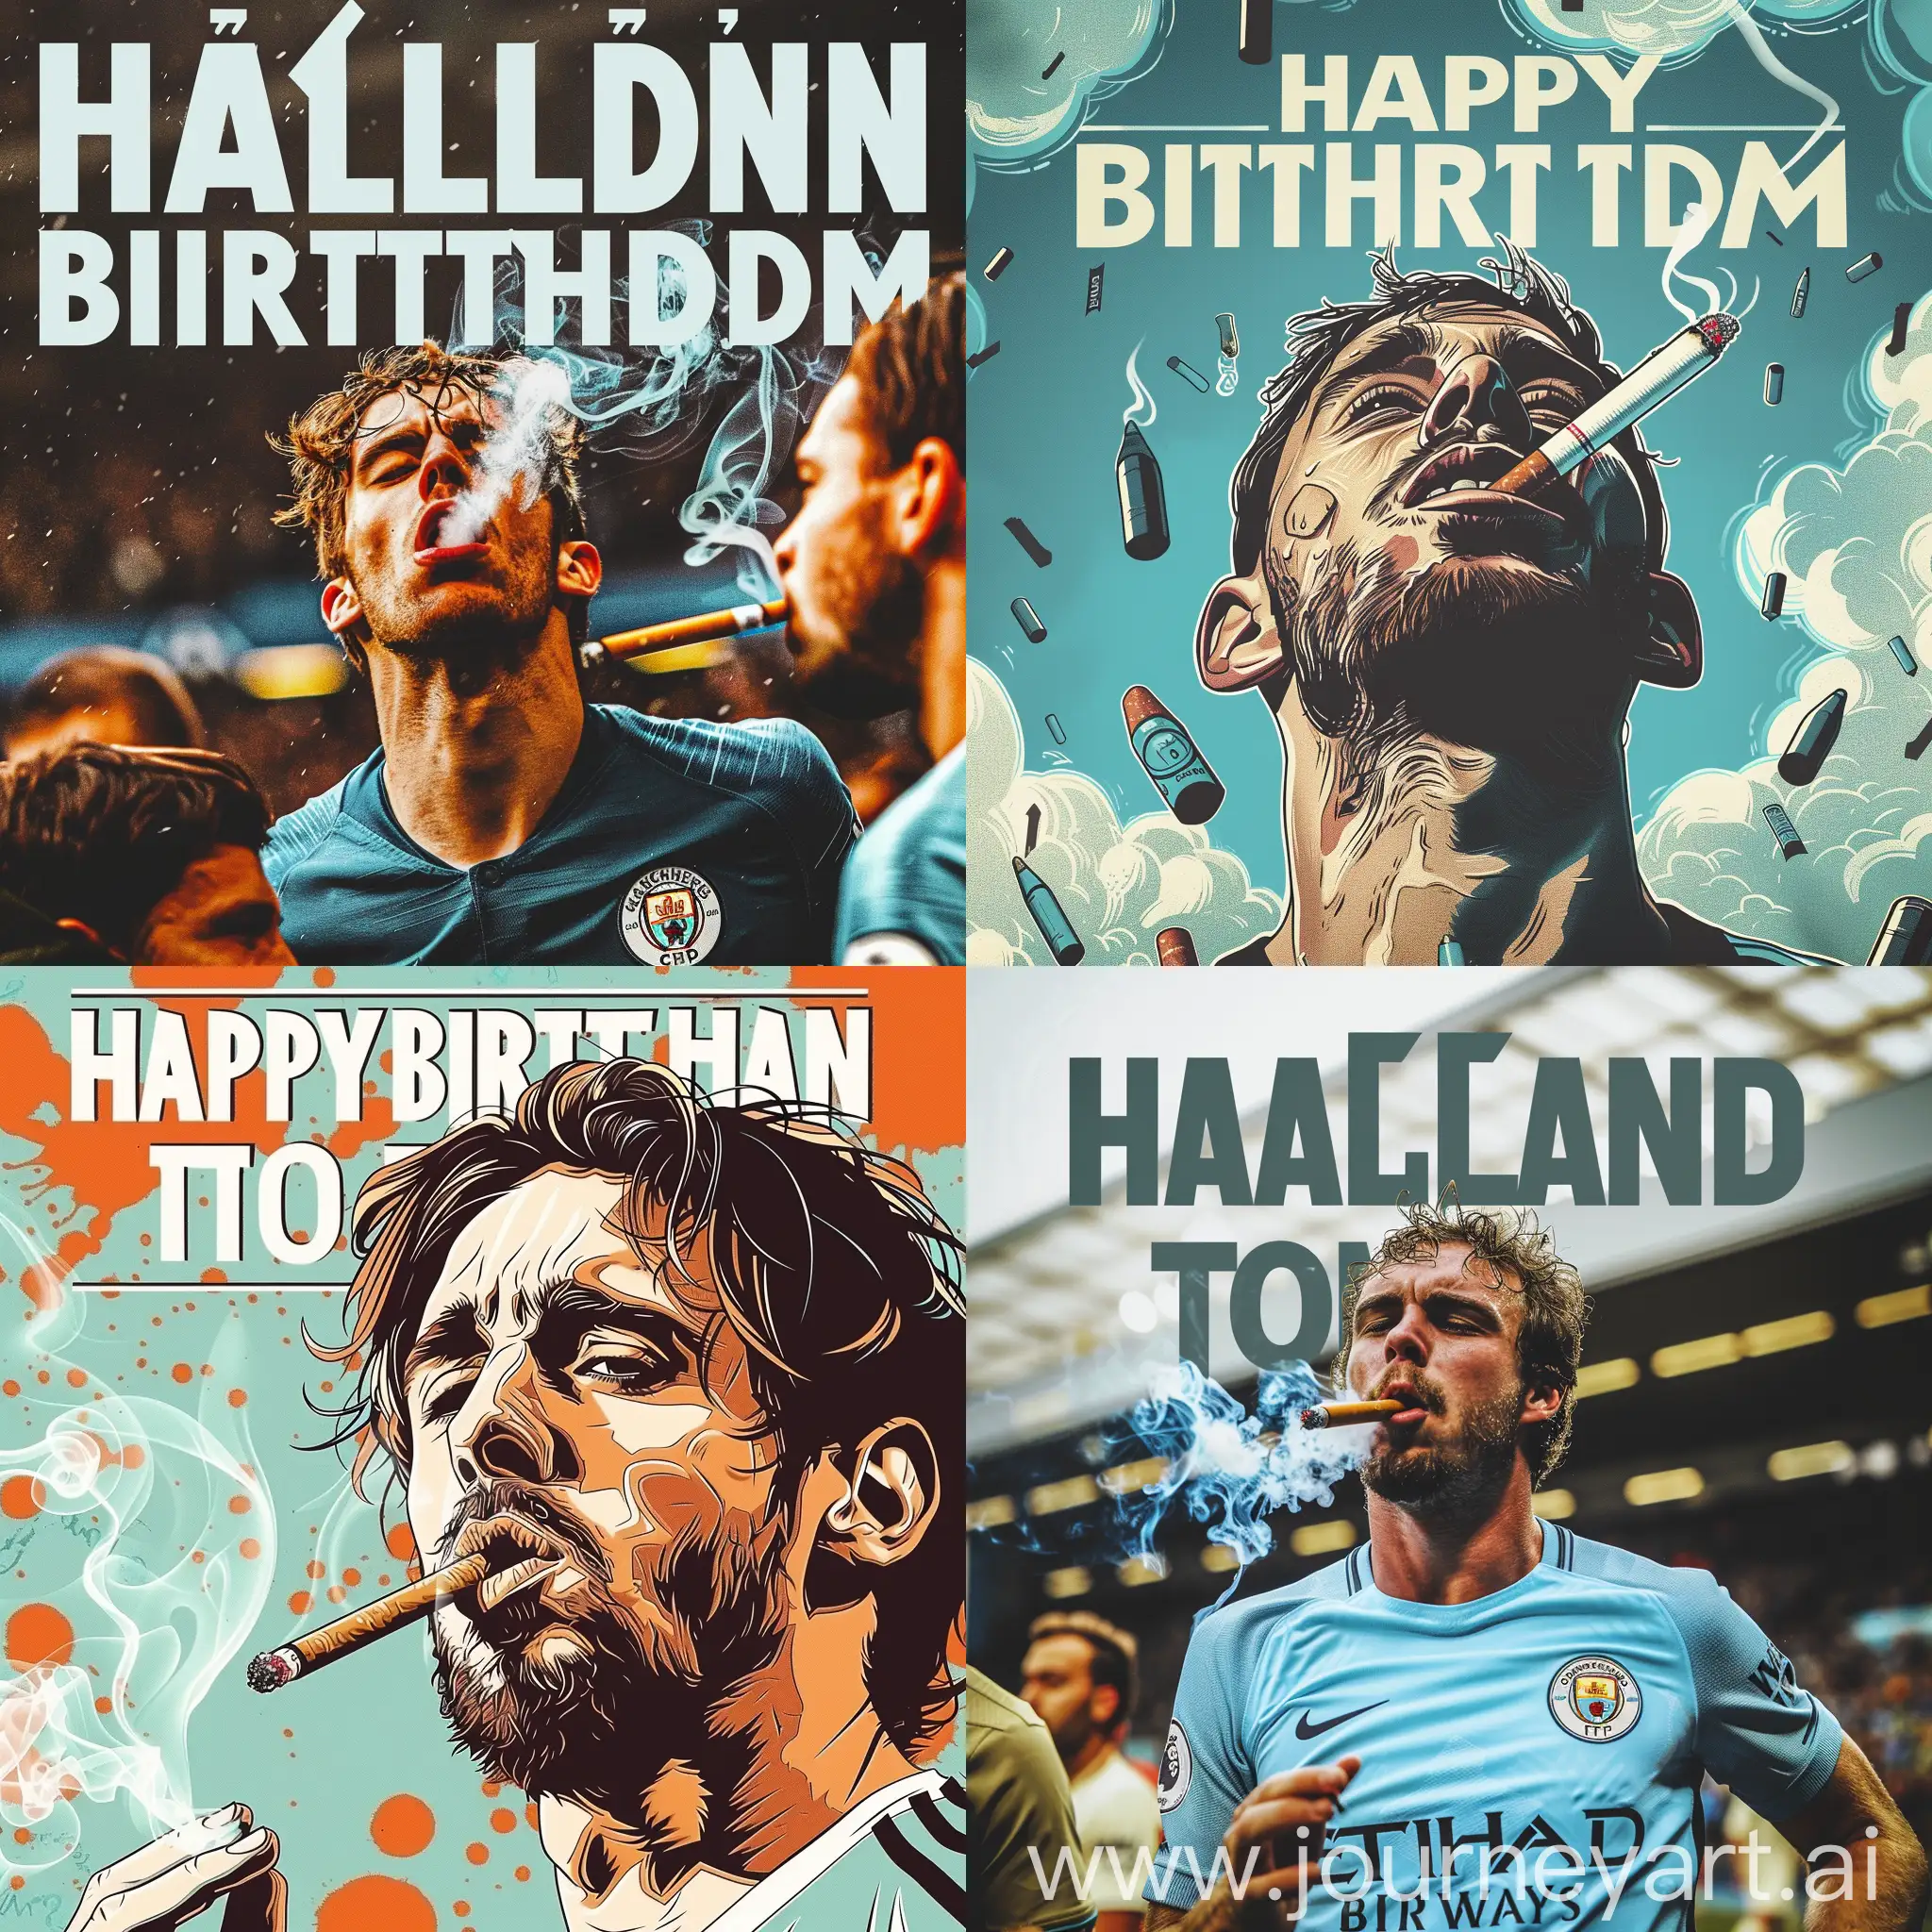 Humorous-Man-CityThemed-Poster-Celebrating-Toms-Birthday-with-Haaland